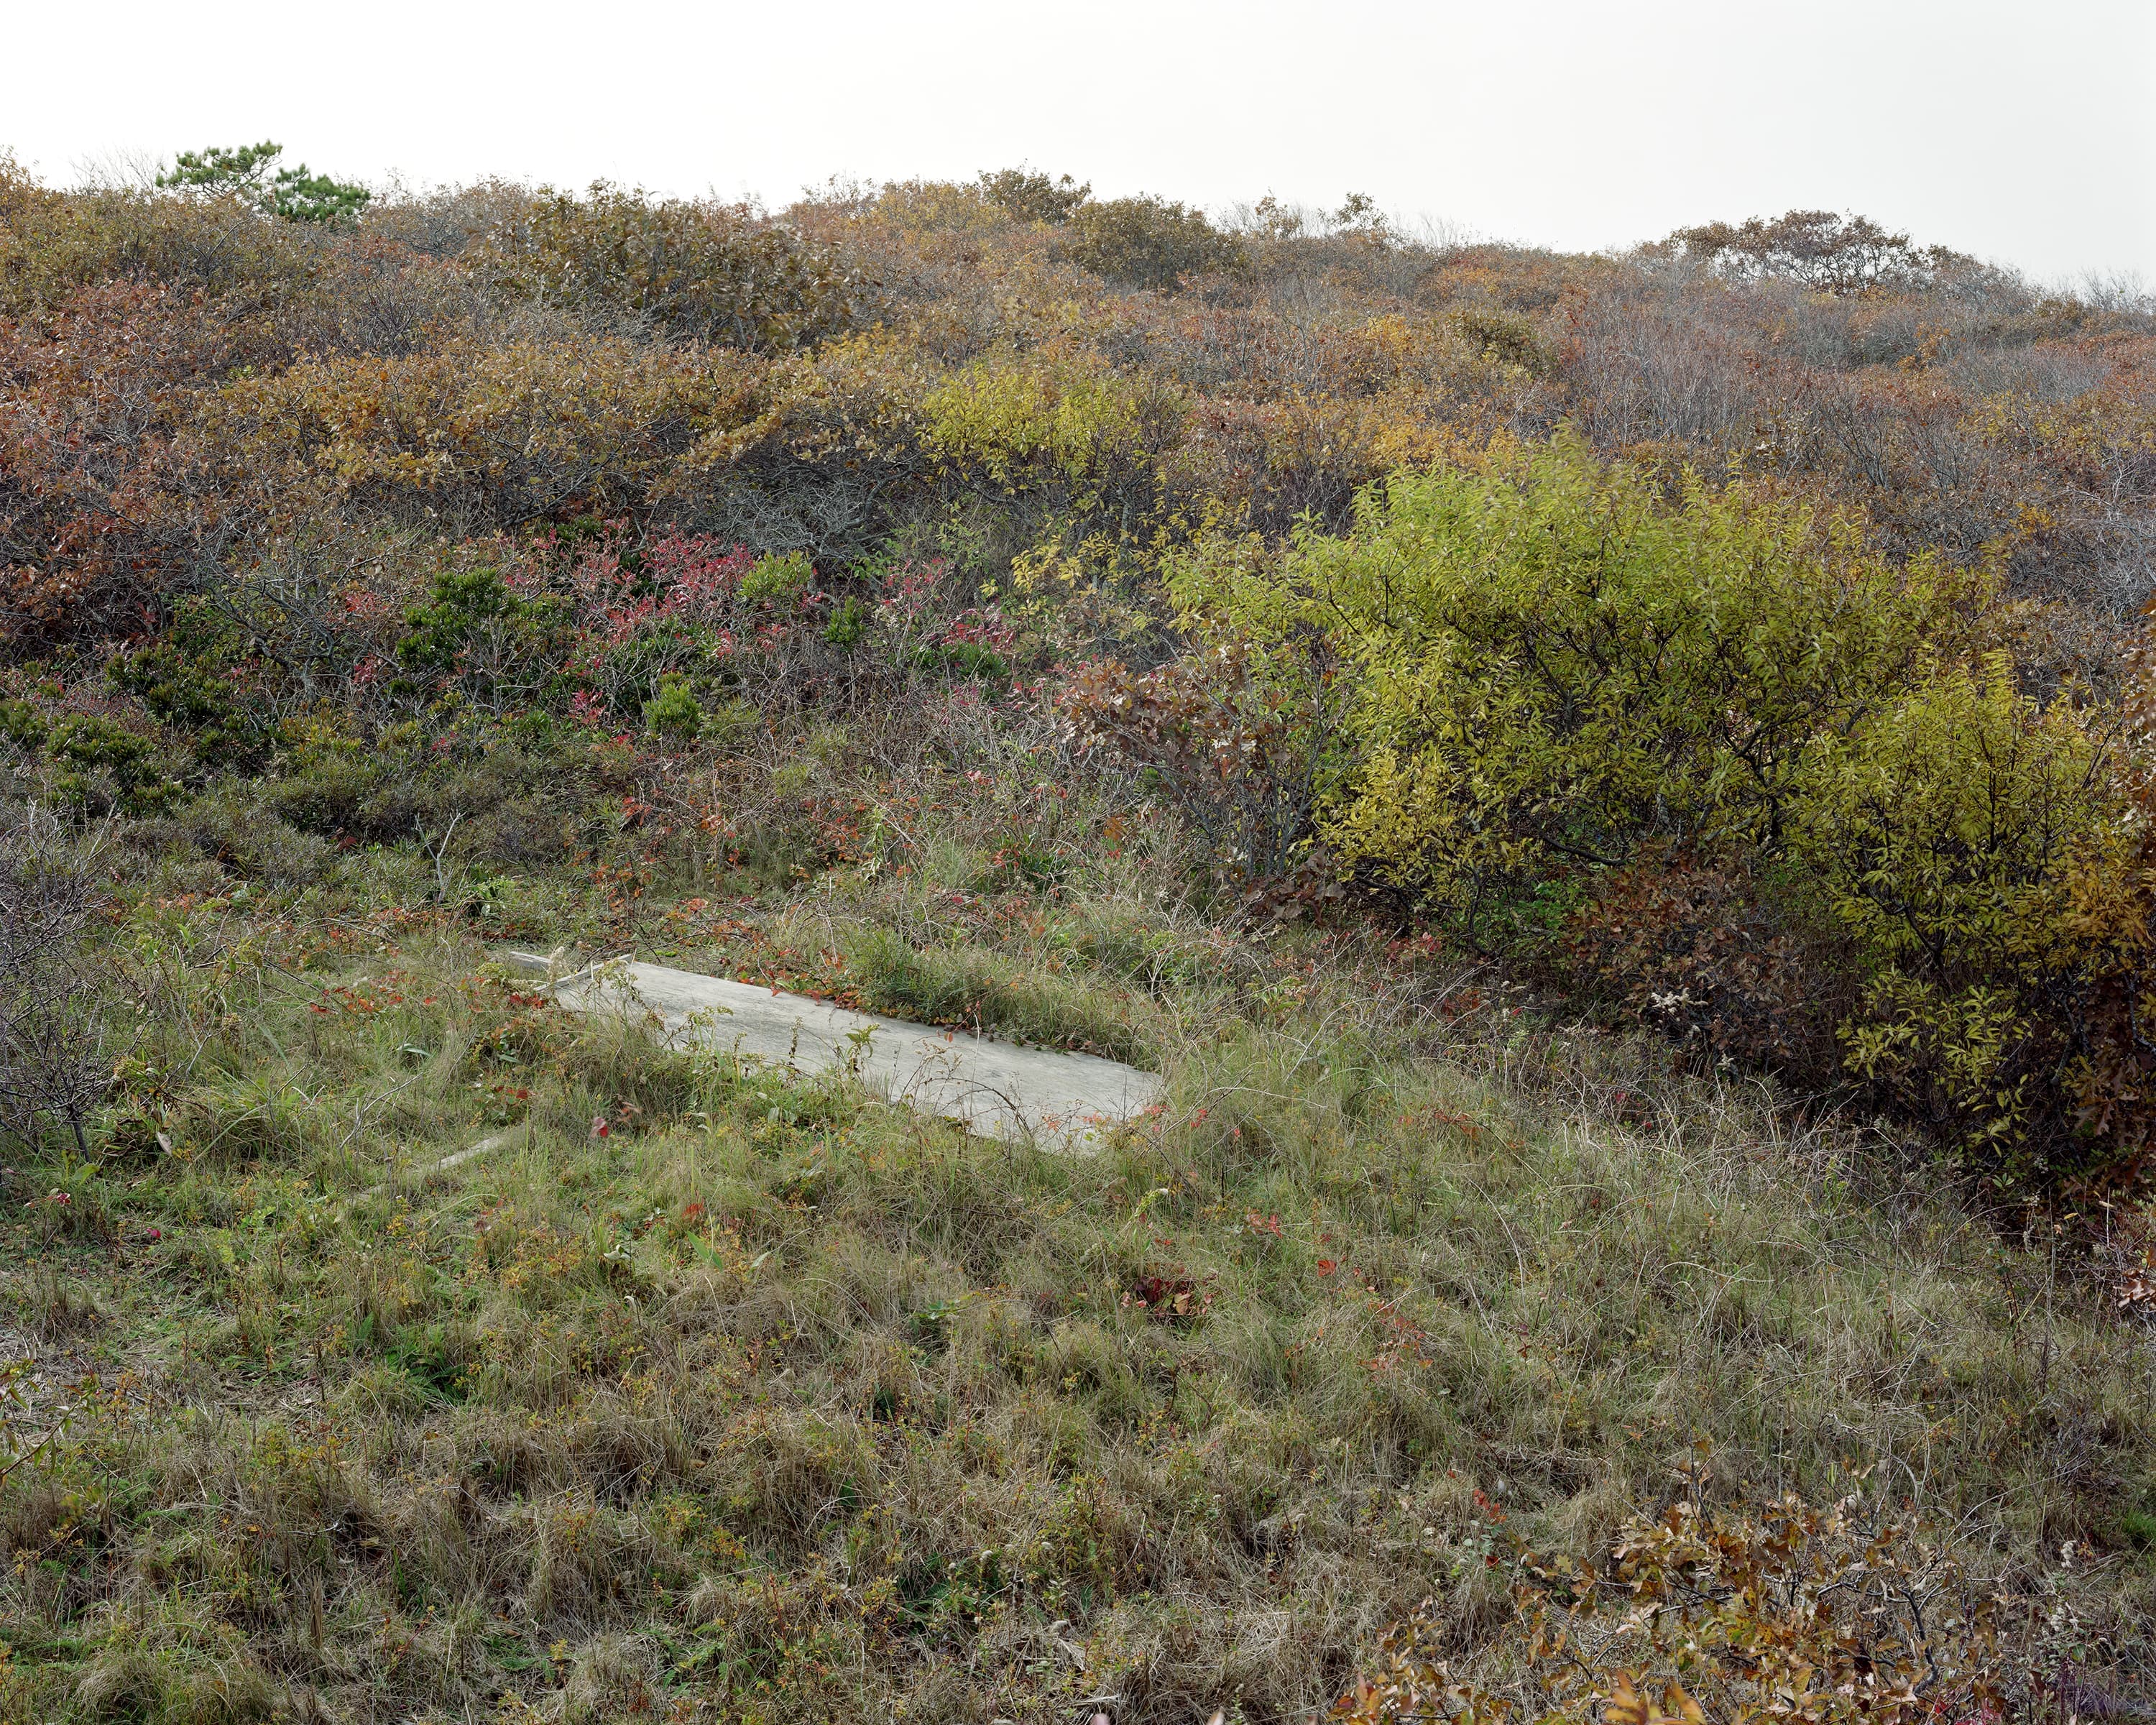 An abandoned large wooden board lies on the ground in a wild field in Truro.